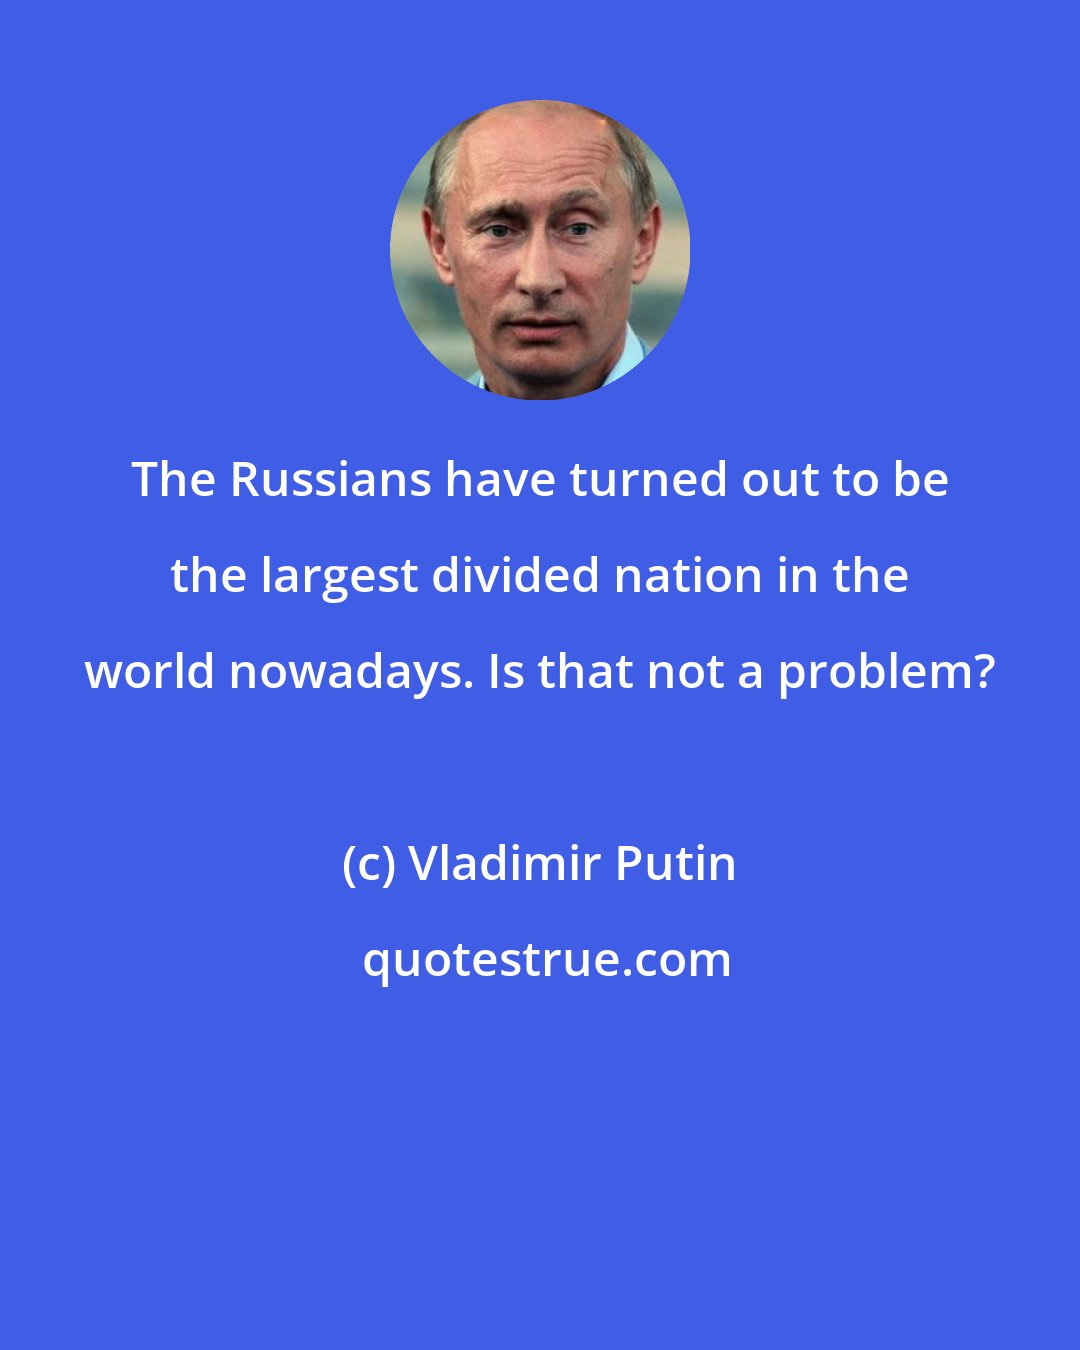 Vladimir Putin: The Russians have turned out to be the largest divided nation in the world nowadays. Is that not a problem?